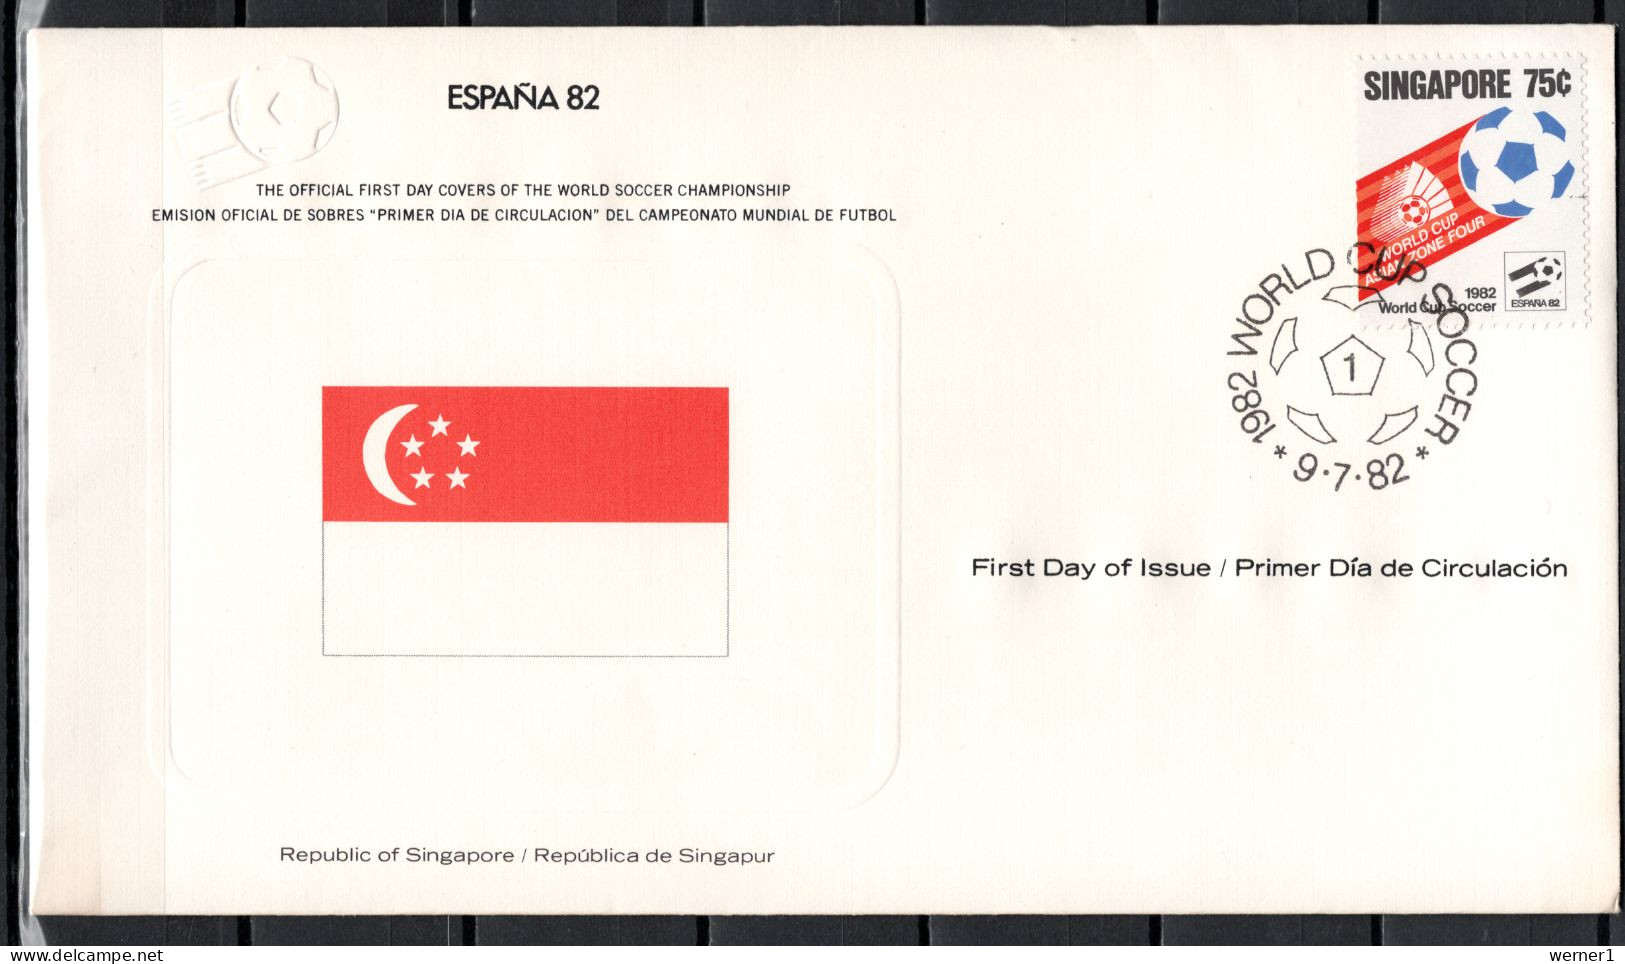 Singapore 1982 Football Soccer World Cup Commemorative FDC - 1982 – Spain